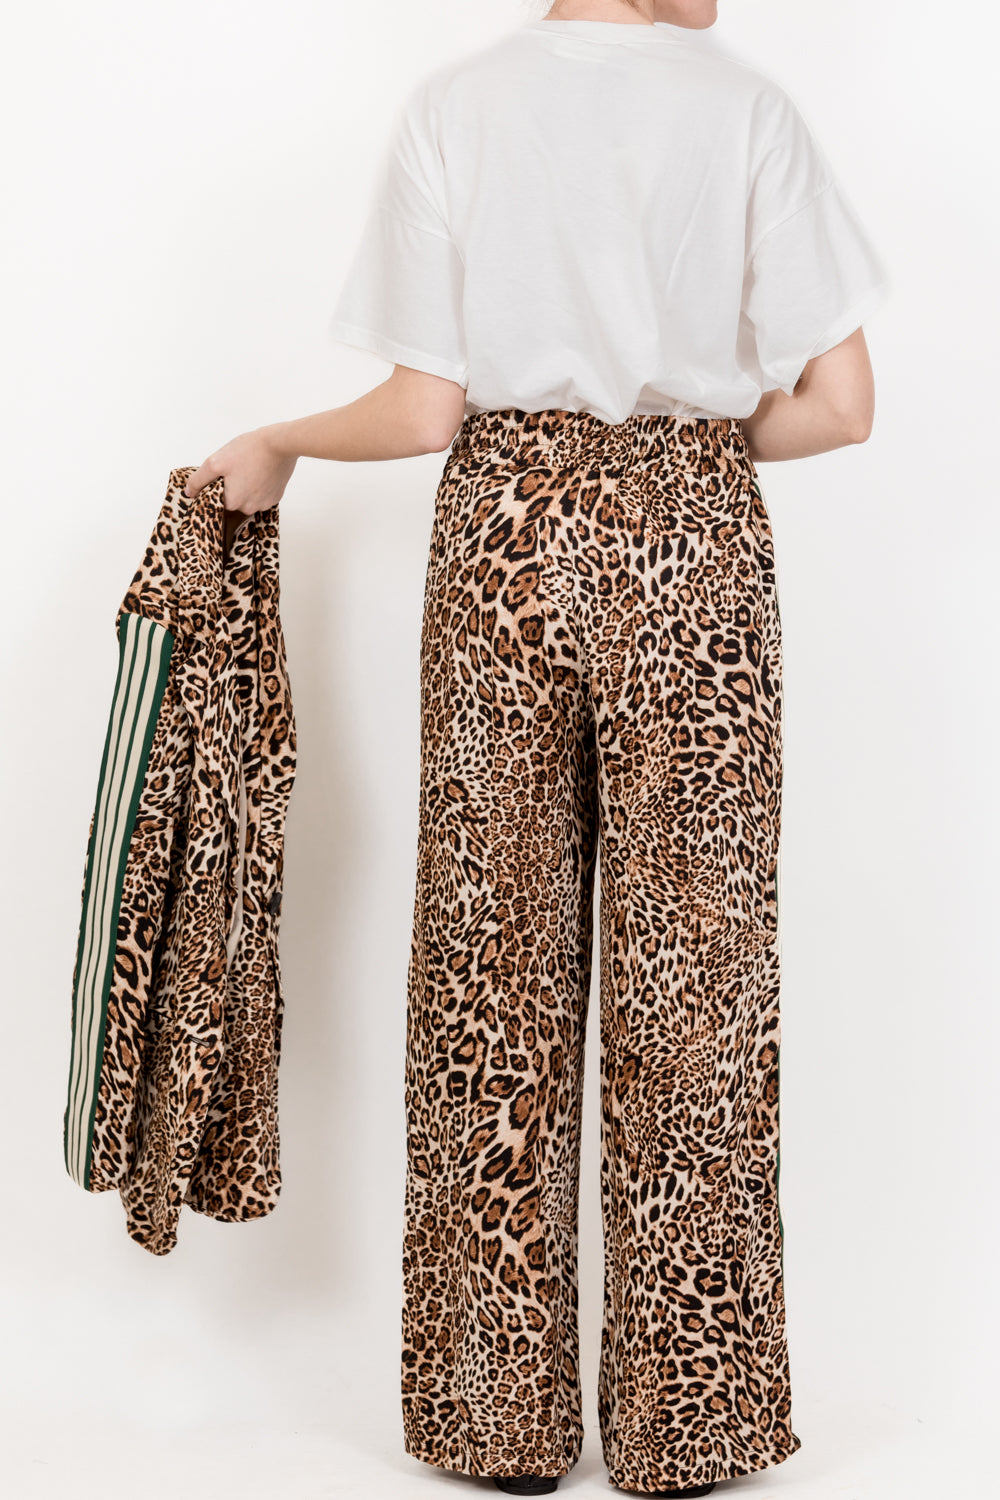 Tensione In - Pantalone animalier coulisse banda laterale contrasto Art. 33577